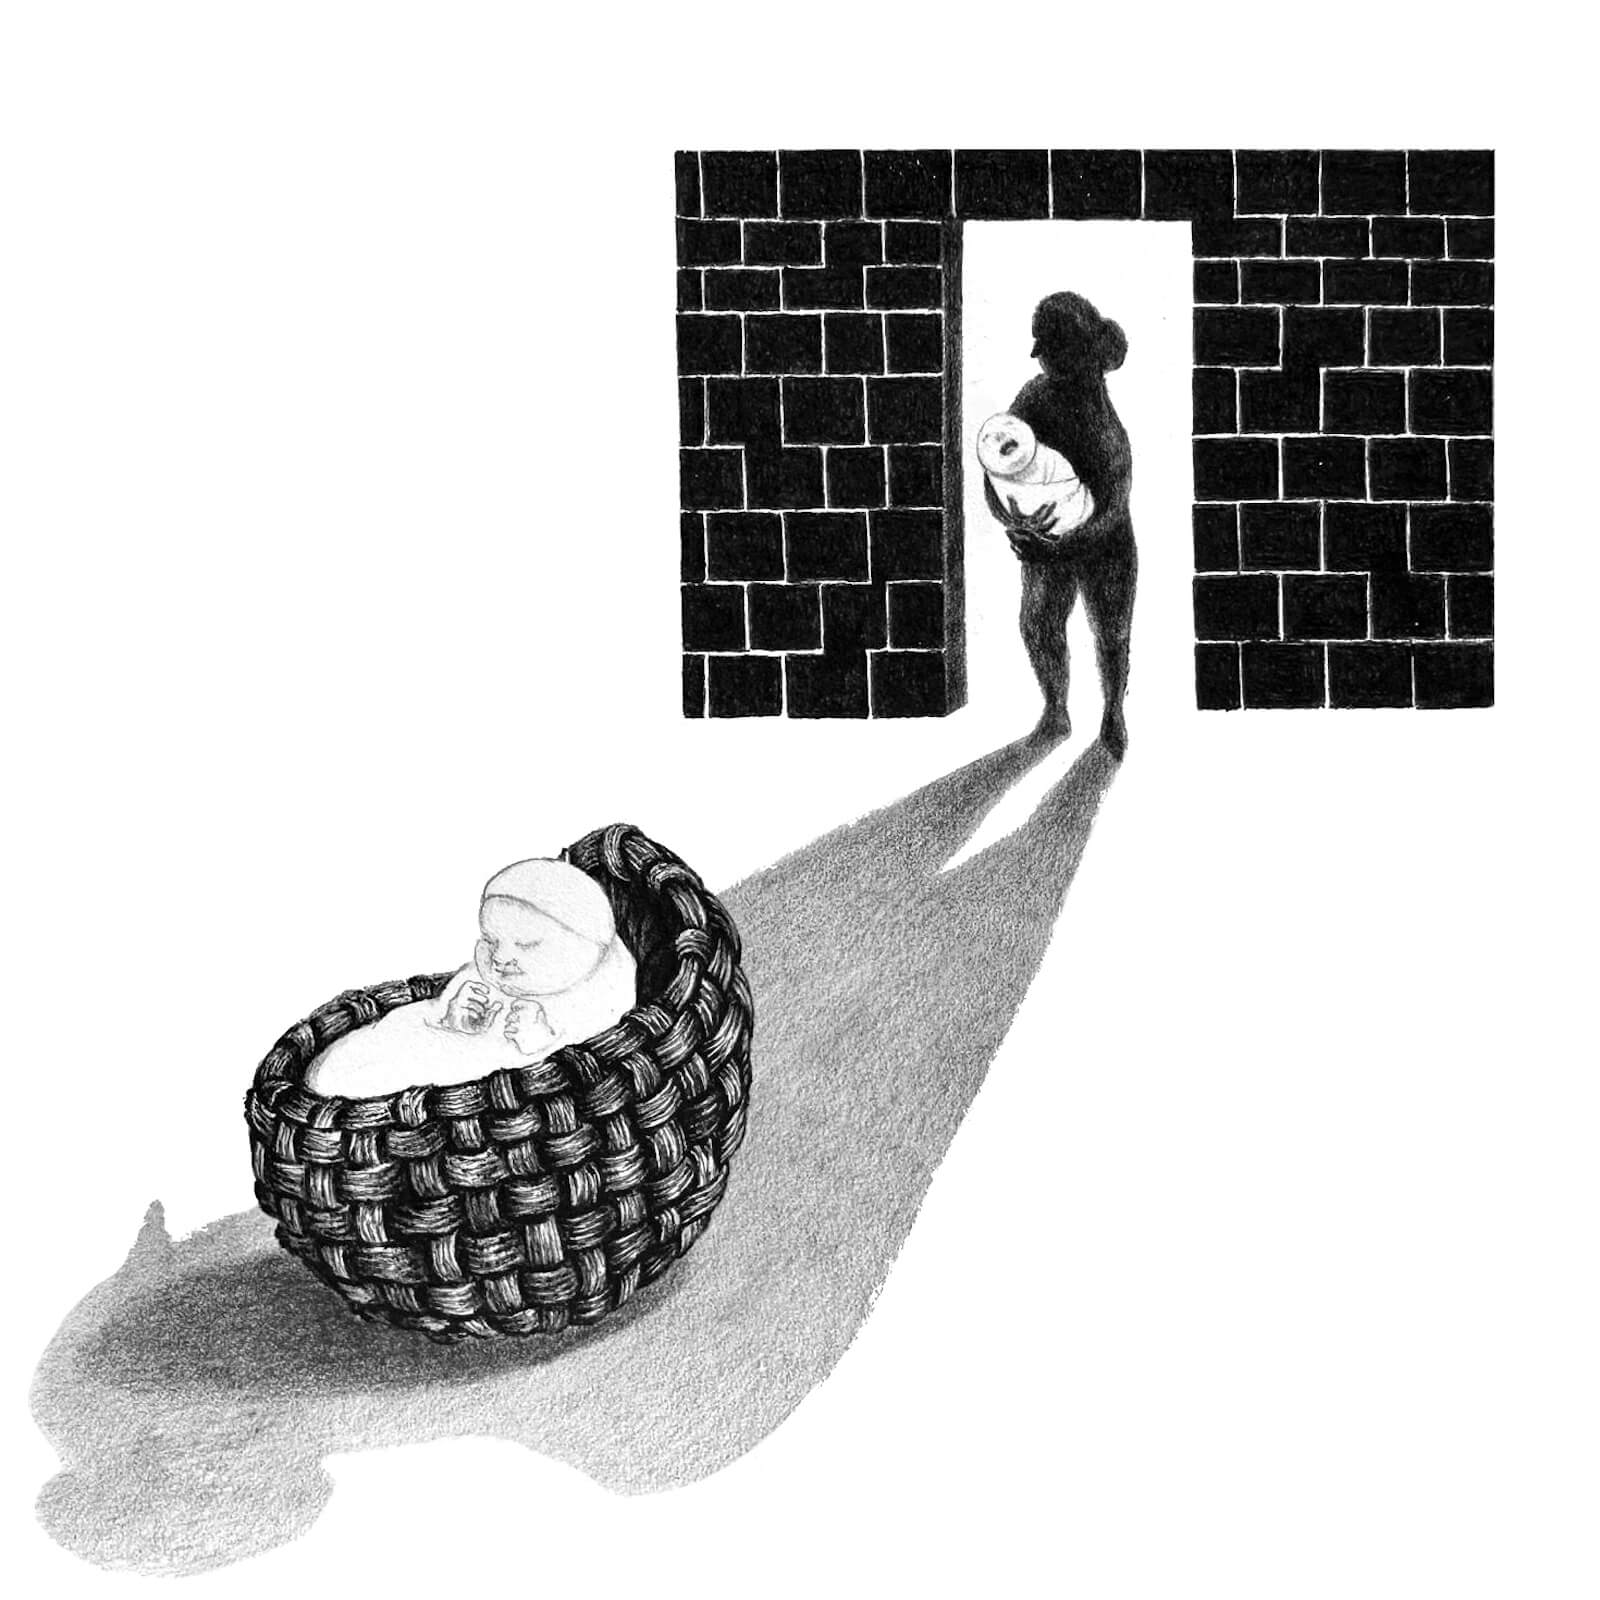 Scene 7: 
We’ve transported inside the hushed home. The room is bare but for a sleeping baby snug under blankets in a woven wicker basket, rocking on the floor.

The x-ray widget shows there is another figure in the room. At the edge of the room, a silhouette stands in a doorway, dark and featureless. Their long pale shadow stretches across the floor and falls over the basket.They are clutching an identical baby in their arms, but this baby is wailing. The wall around them is built of neatly stacked stone.